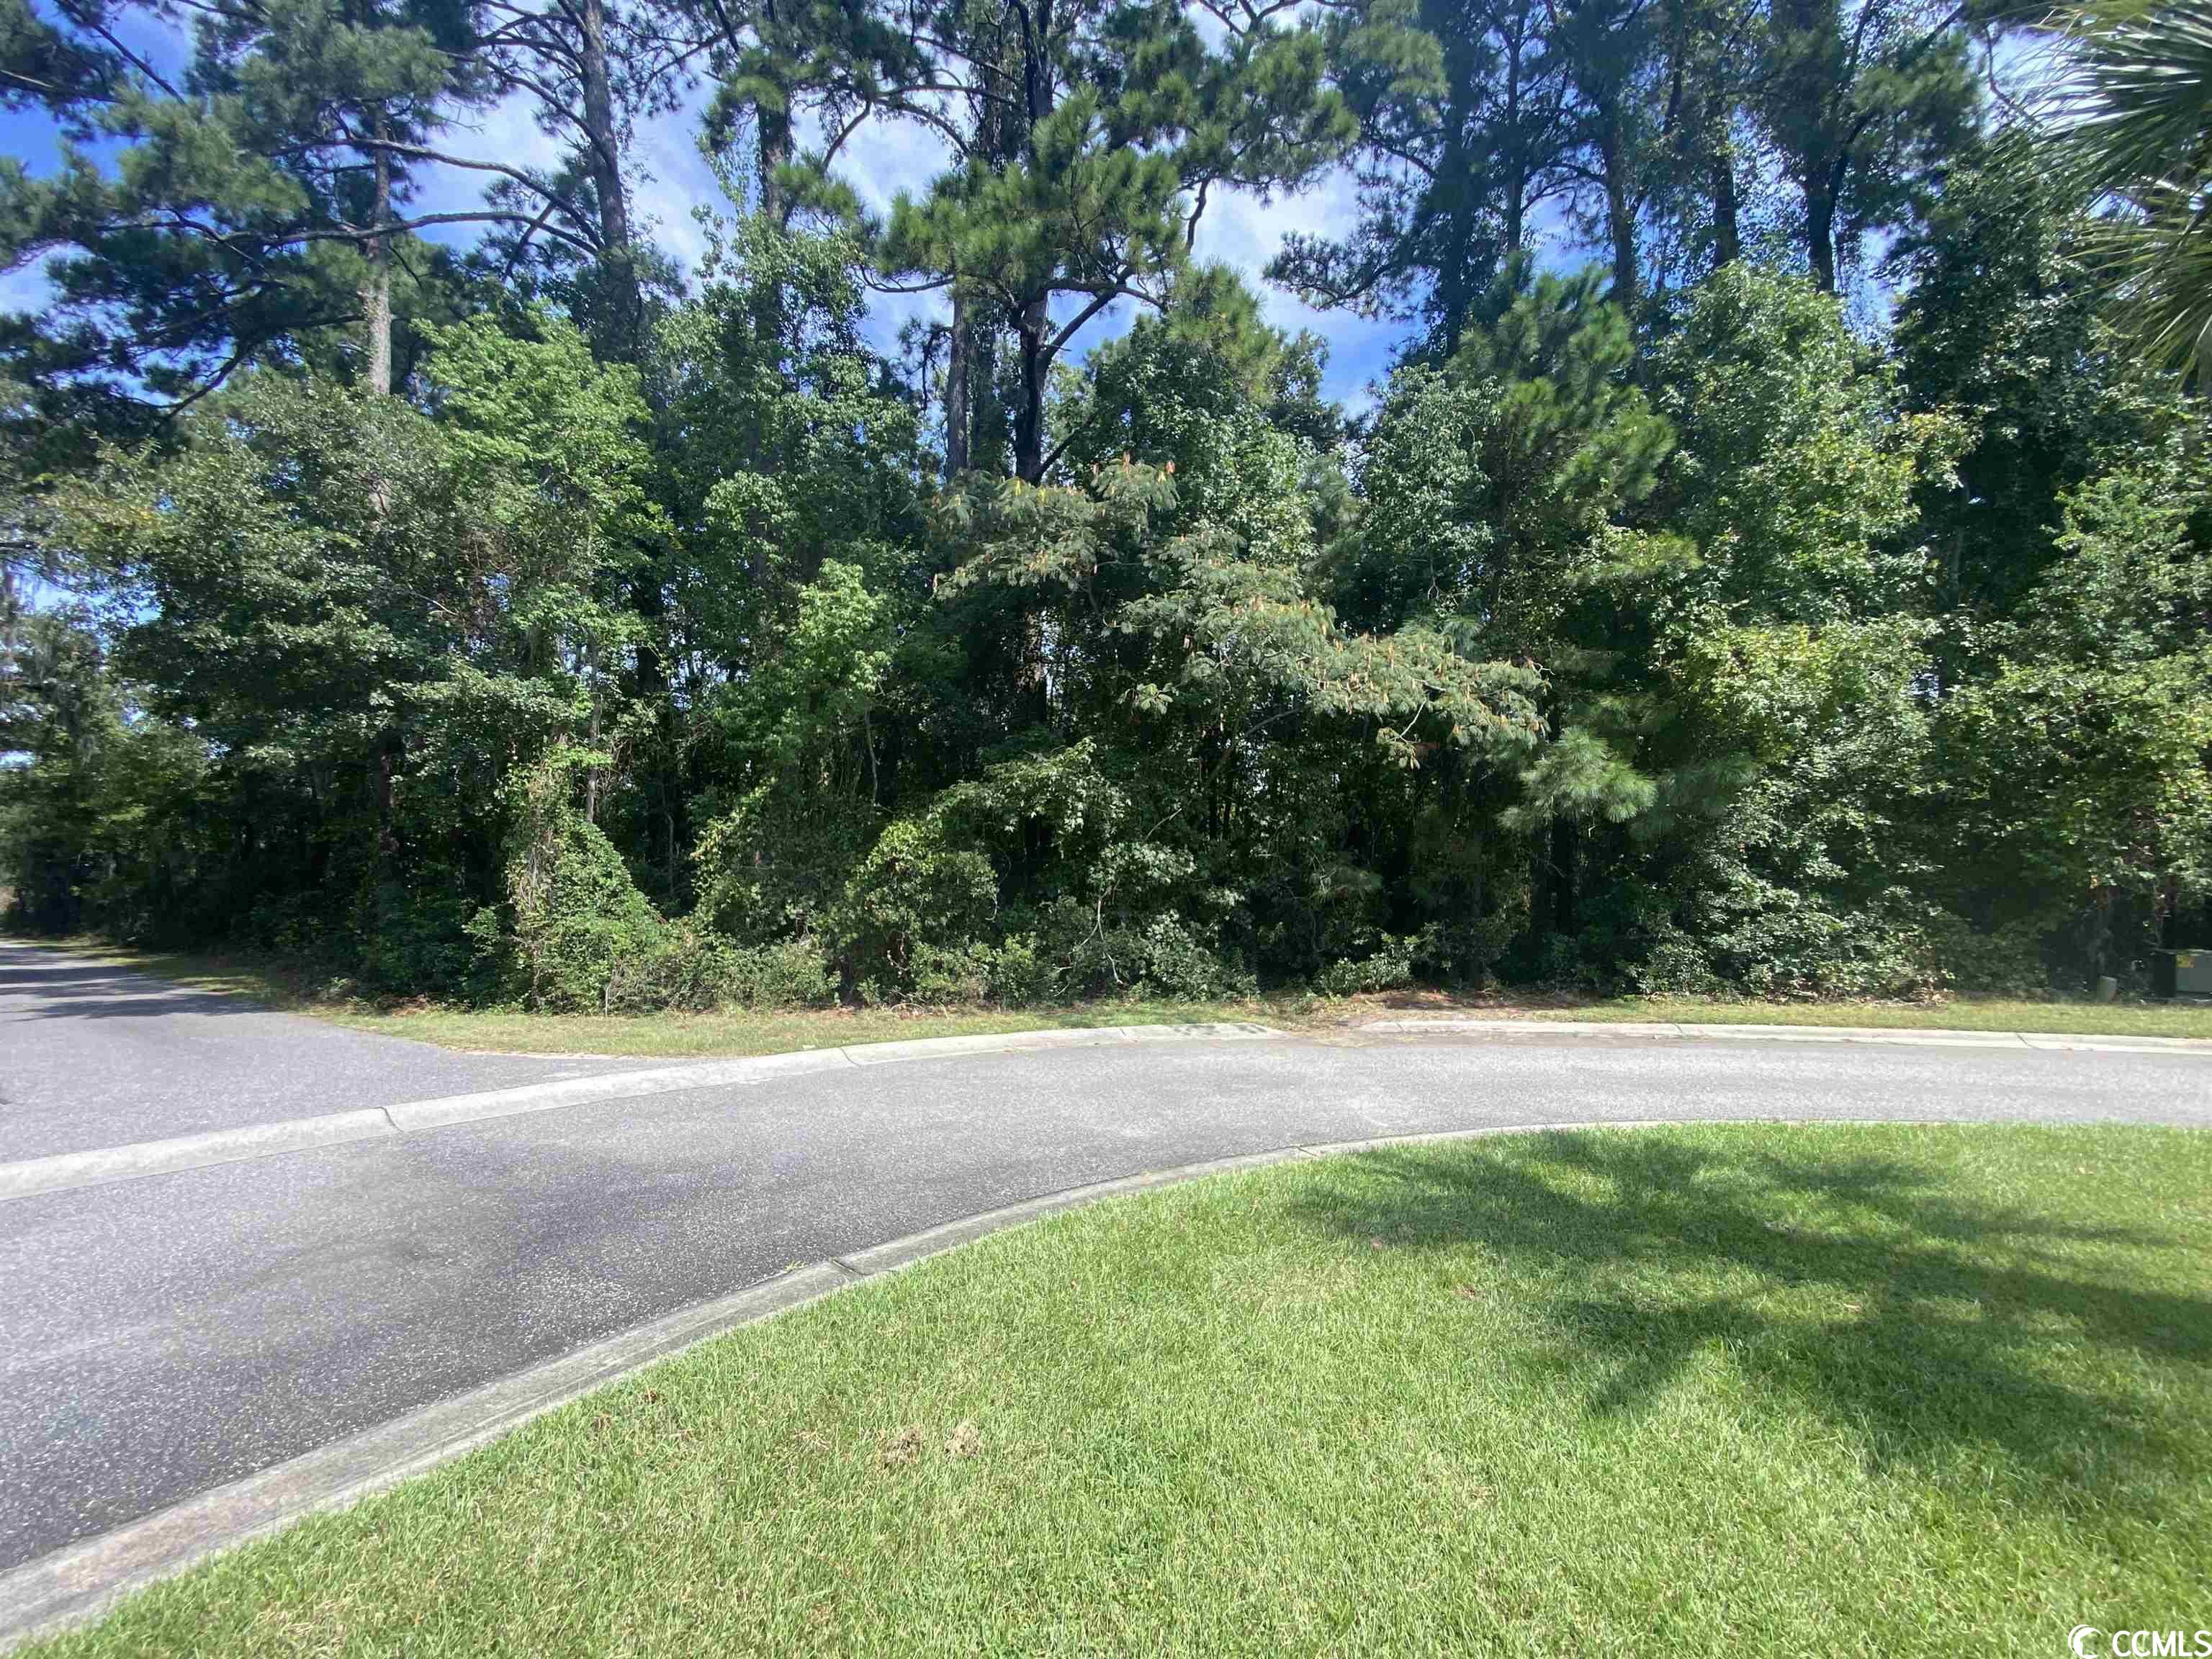 awesome residential lot located in beautiful water front neighborhood, the oaks at winyah bay- community features clubhouse, pool, and day dock on winyah bay- located minutes from downtown georgetown's shopping and eateries- easy commute to mt. pleasant and charleston- check it out